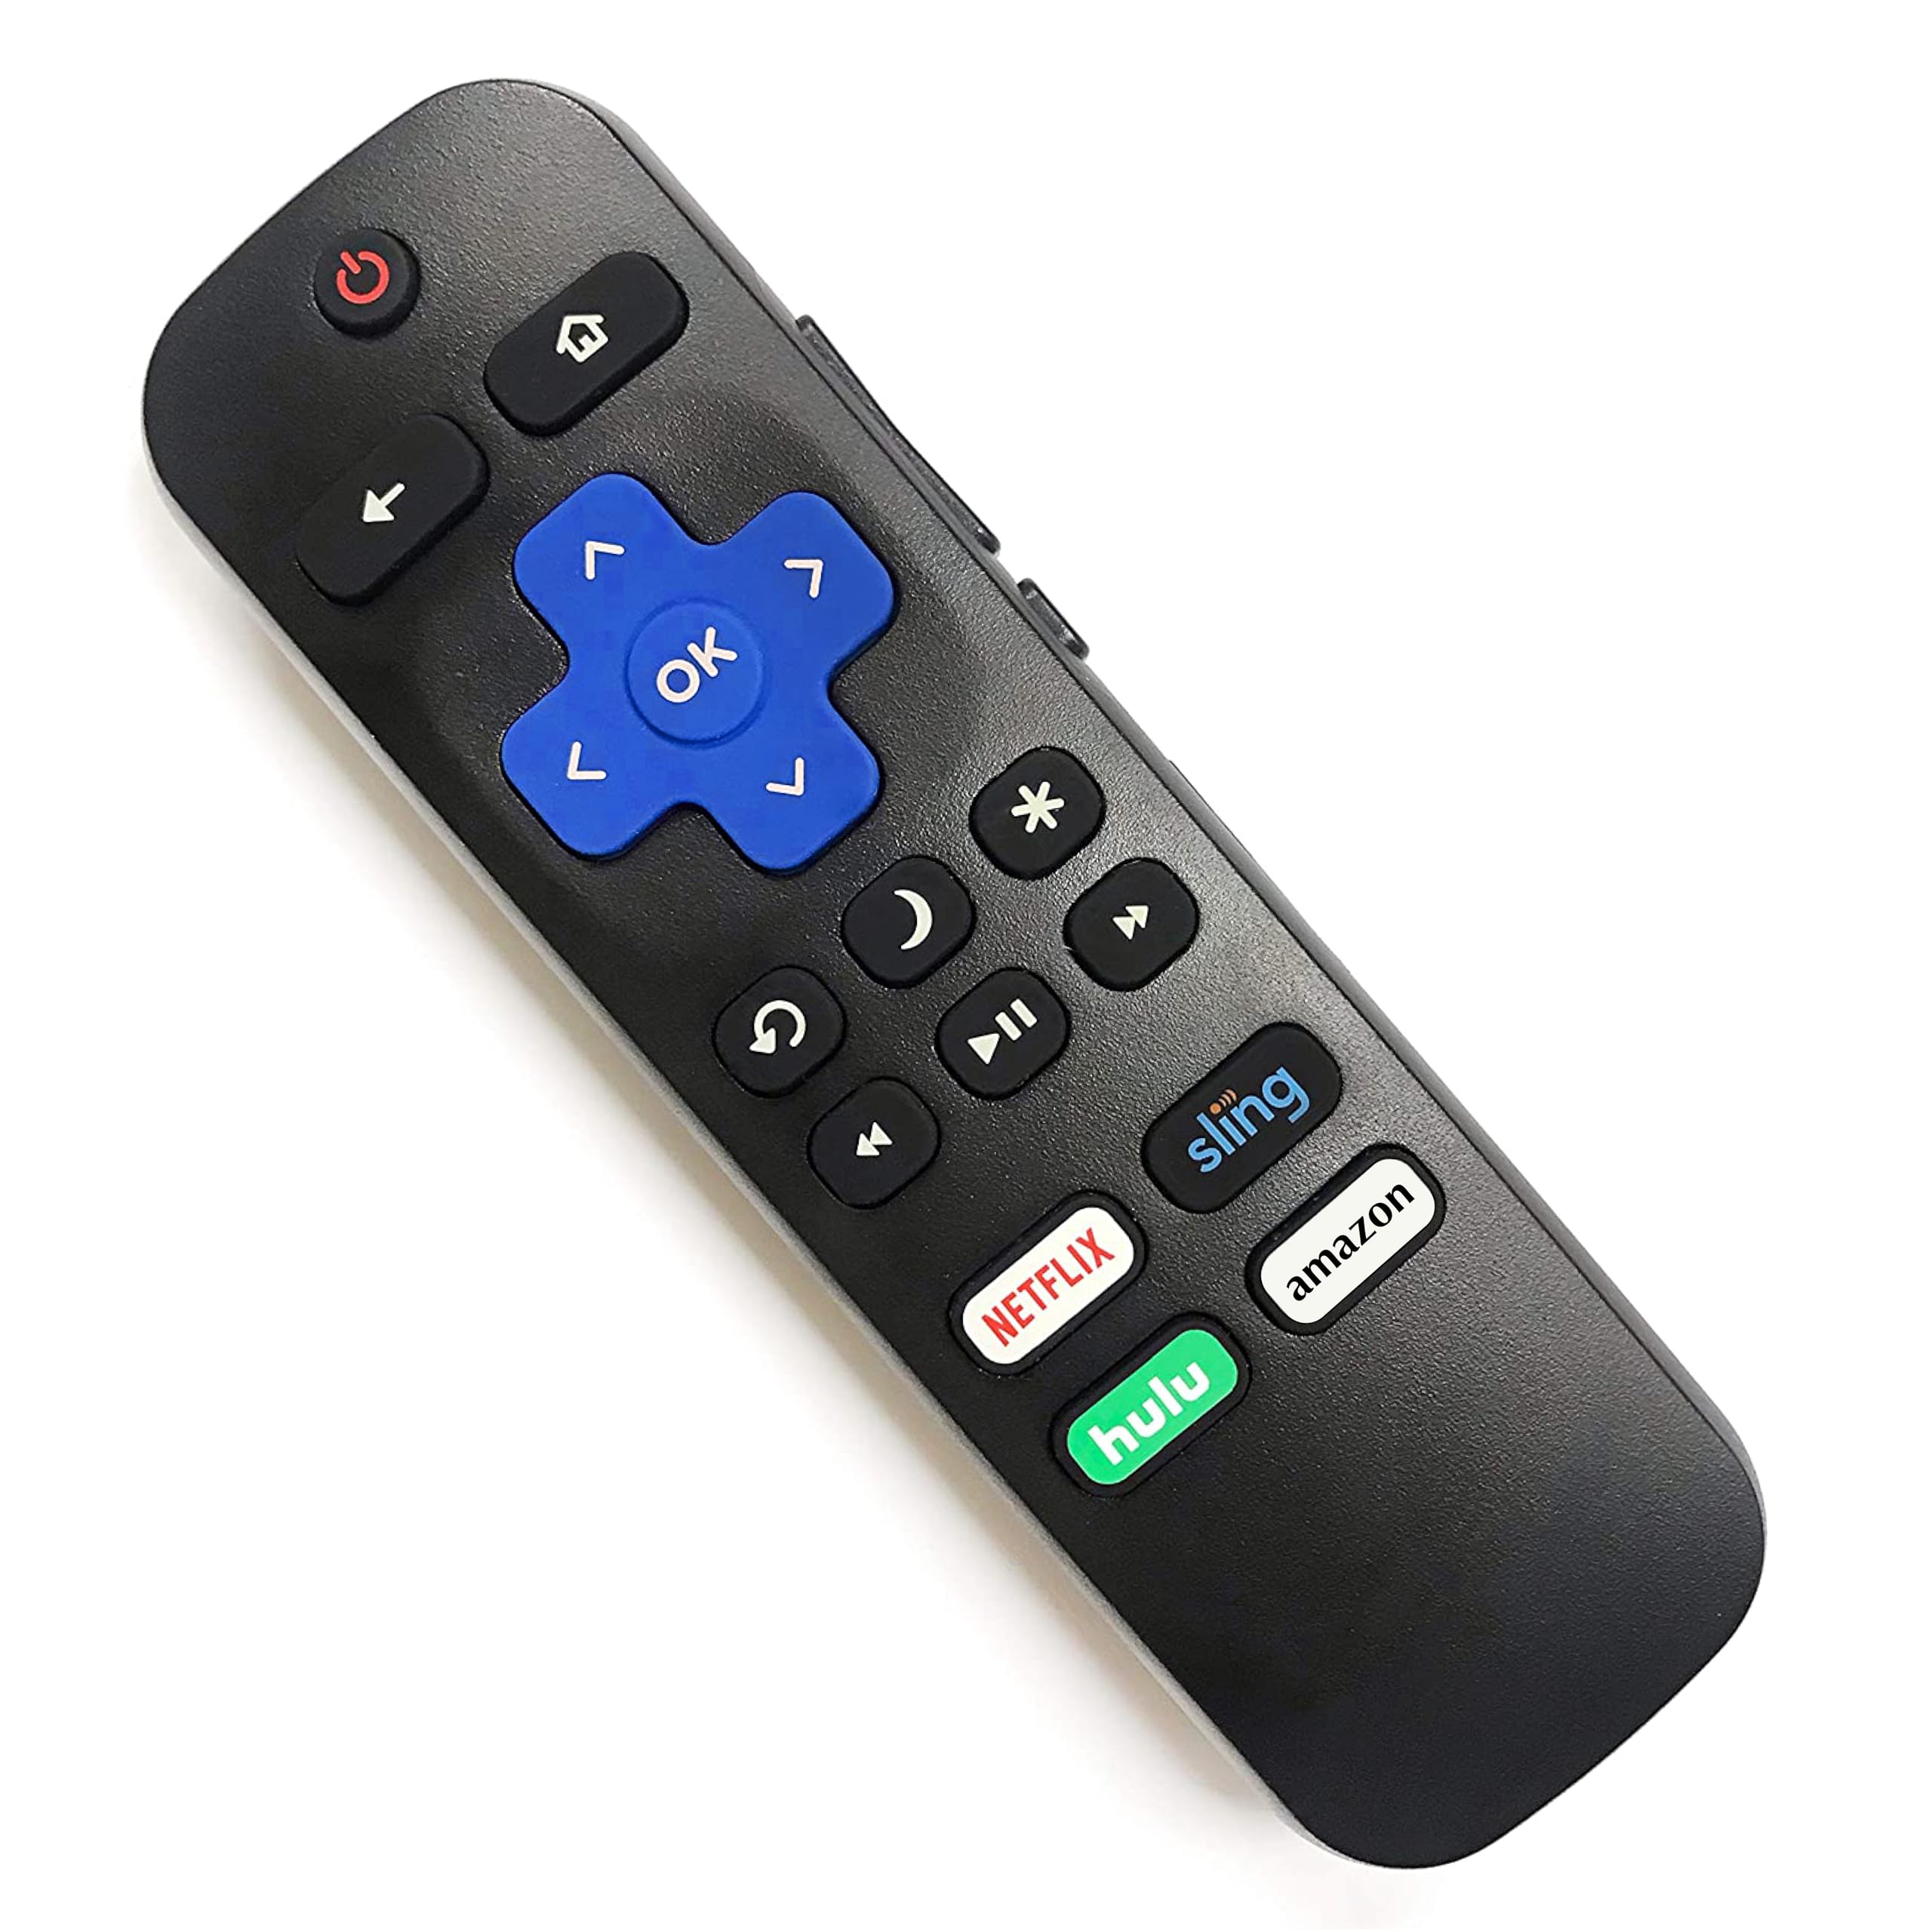 Remote control with volume buttons.